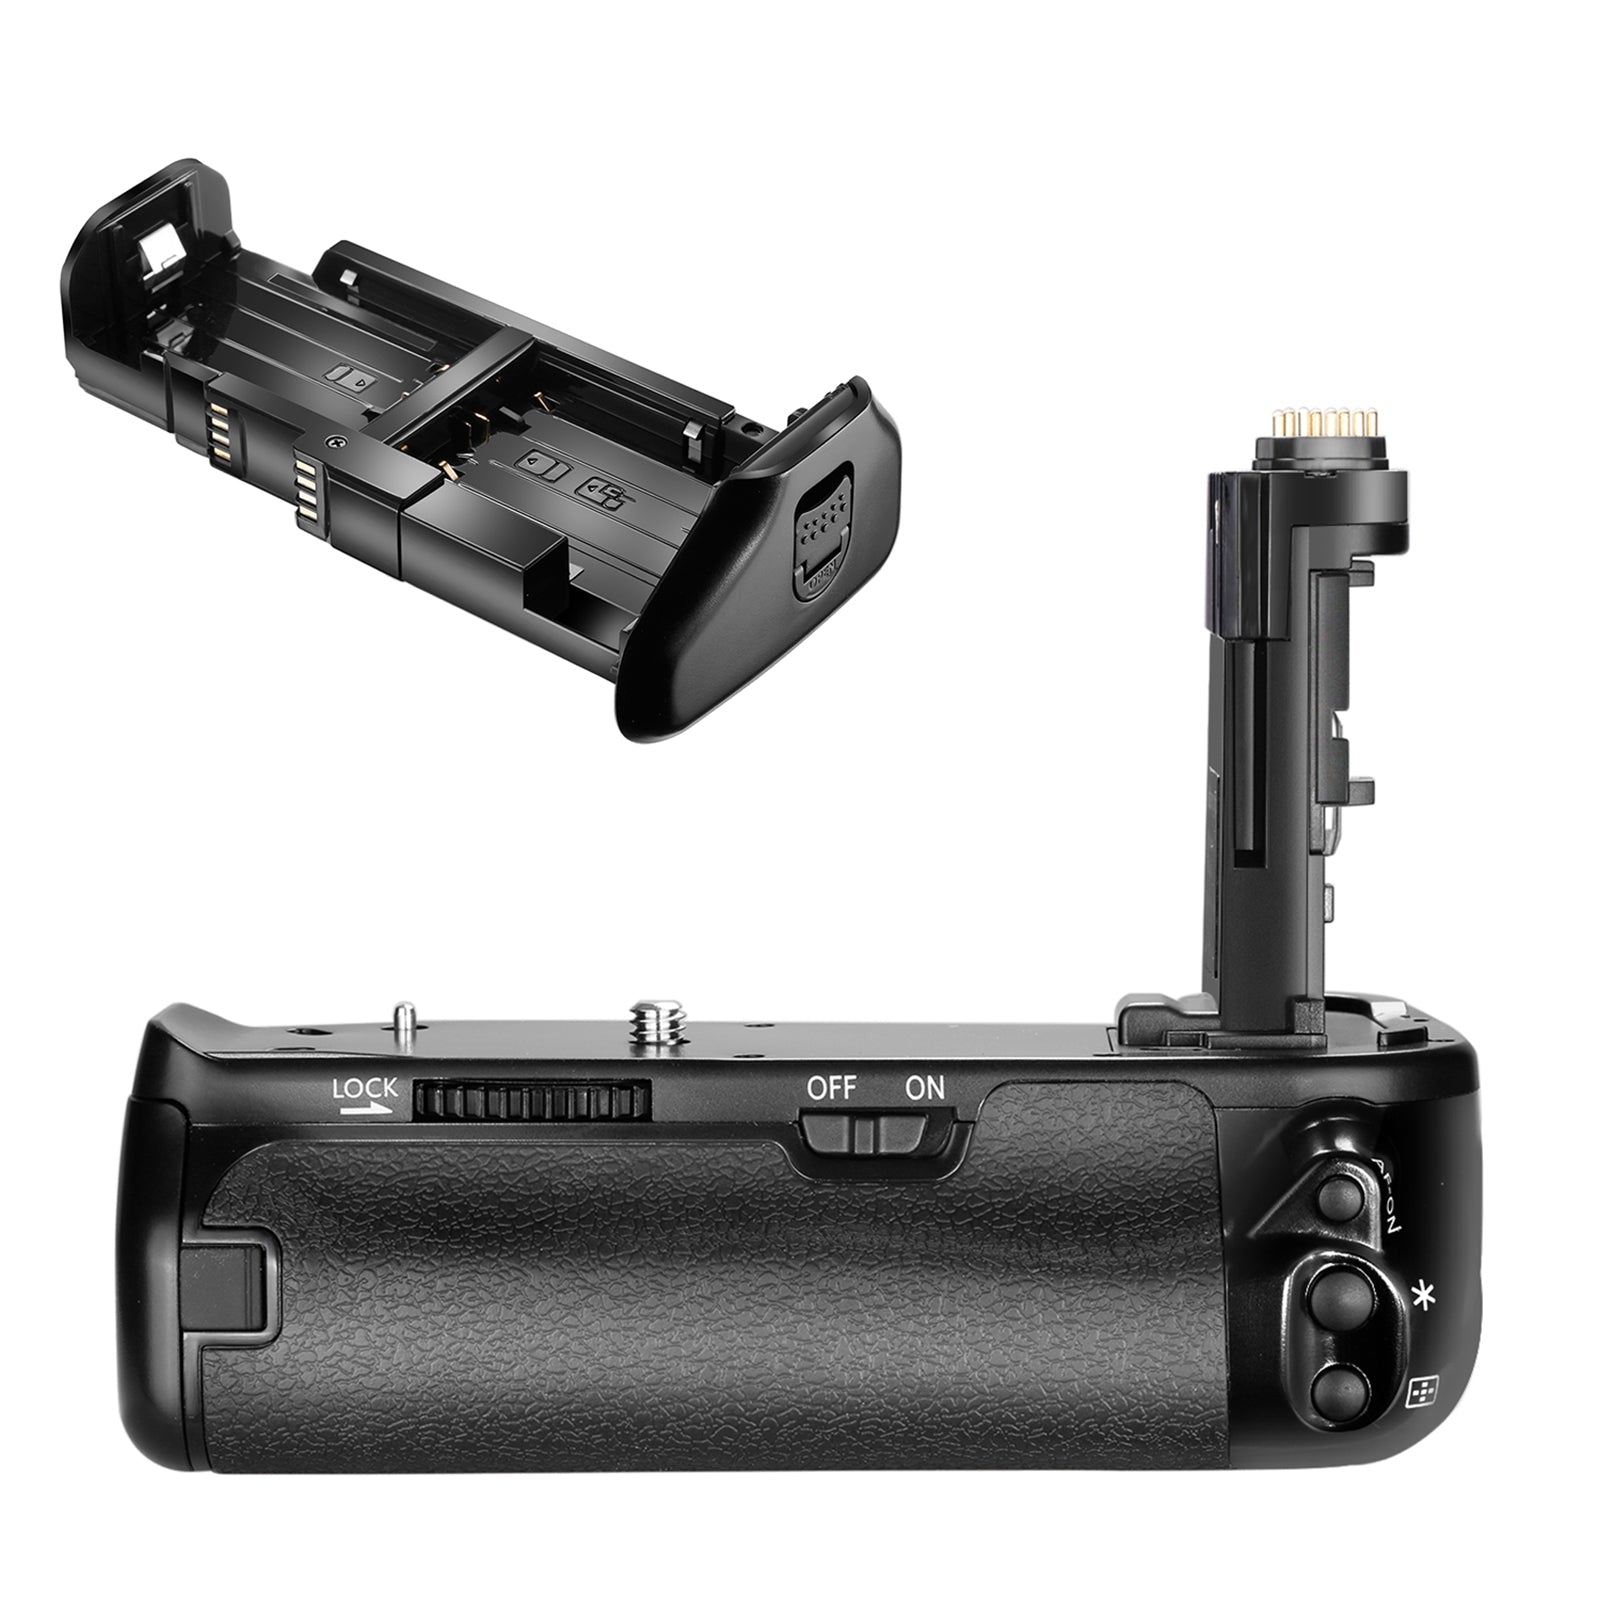 Neewer Pro Camera Battery Grip Replacement